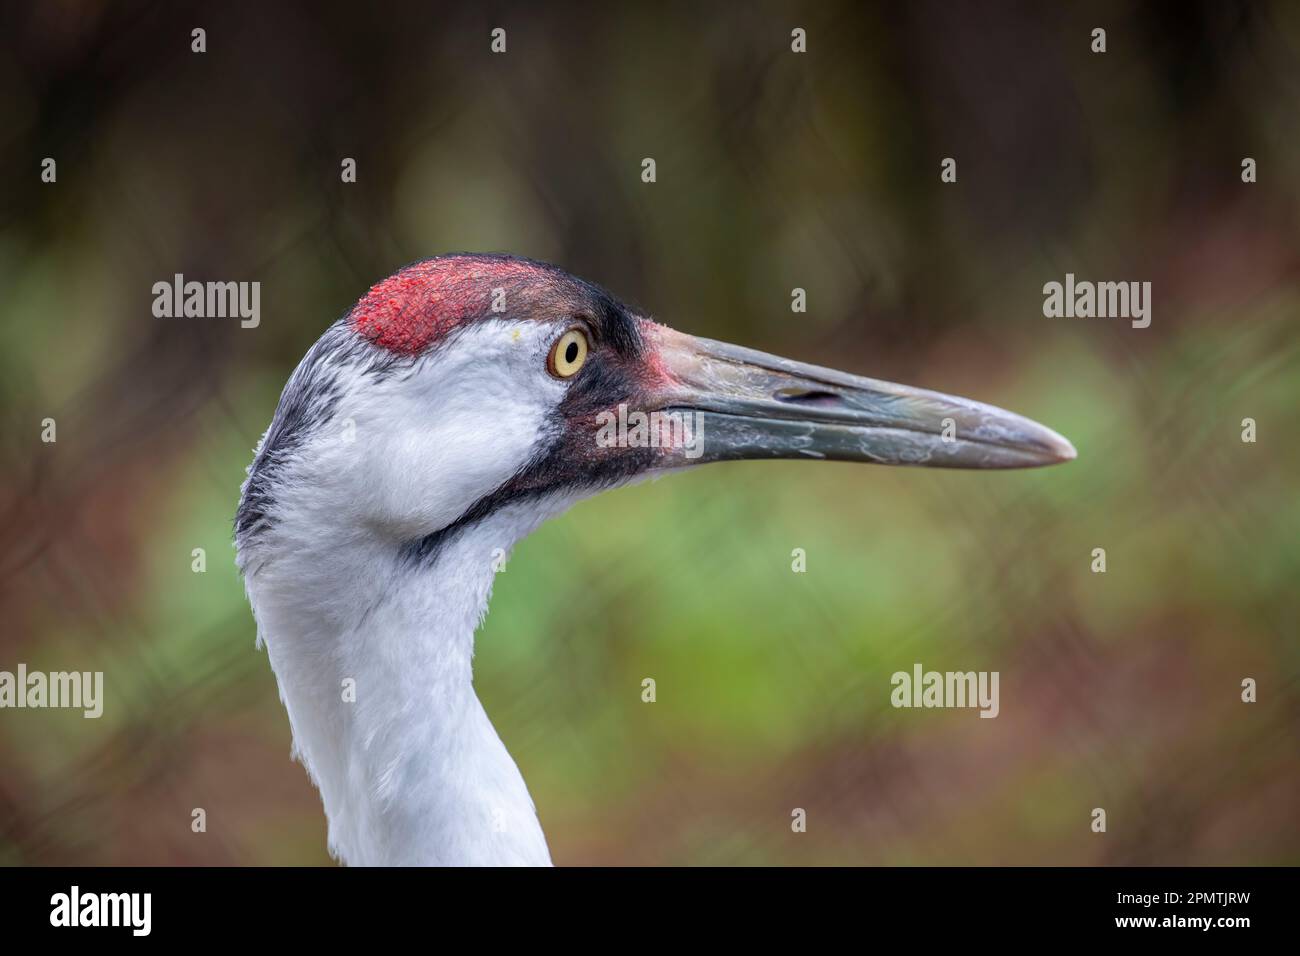 The whooping crane (Grus americana) is the tallest North American bird, named for its whooping sound. It is an endangered crane species. Stock Photo